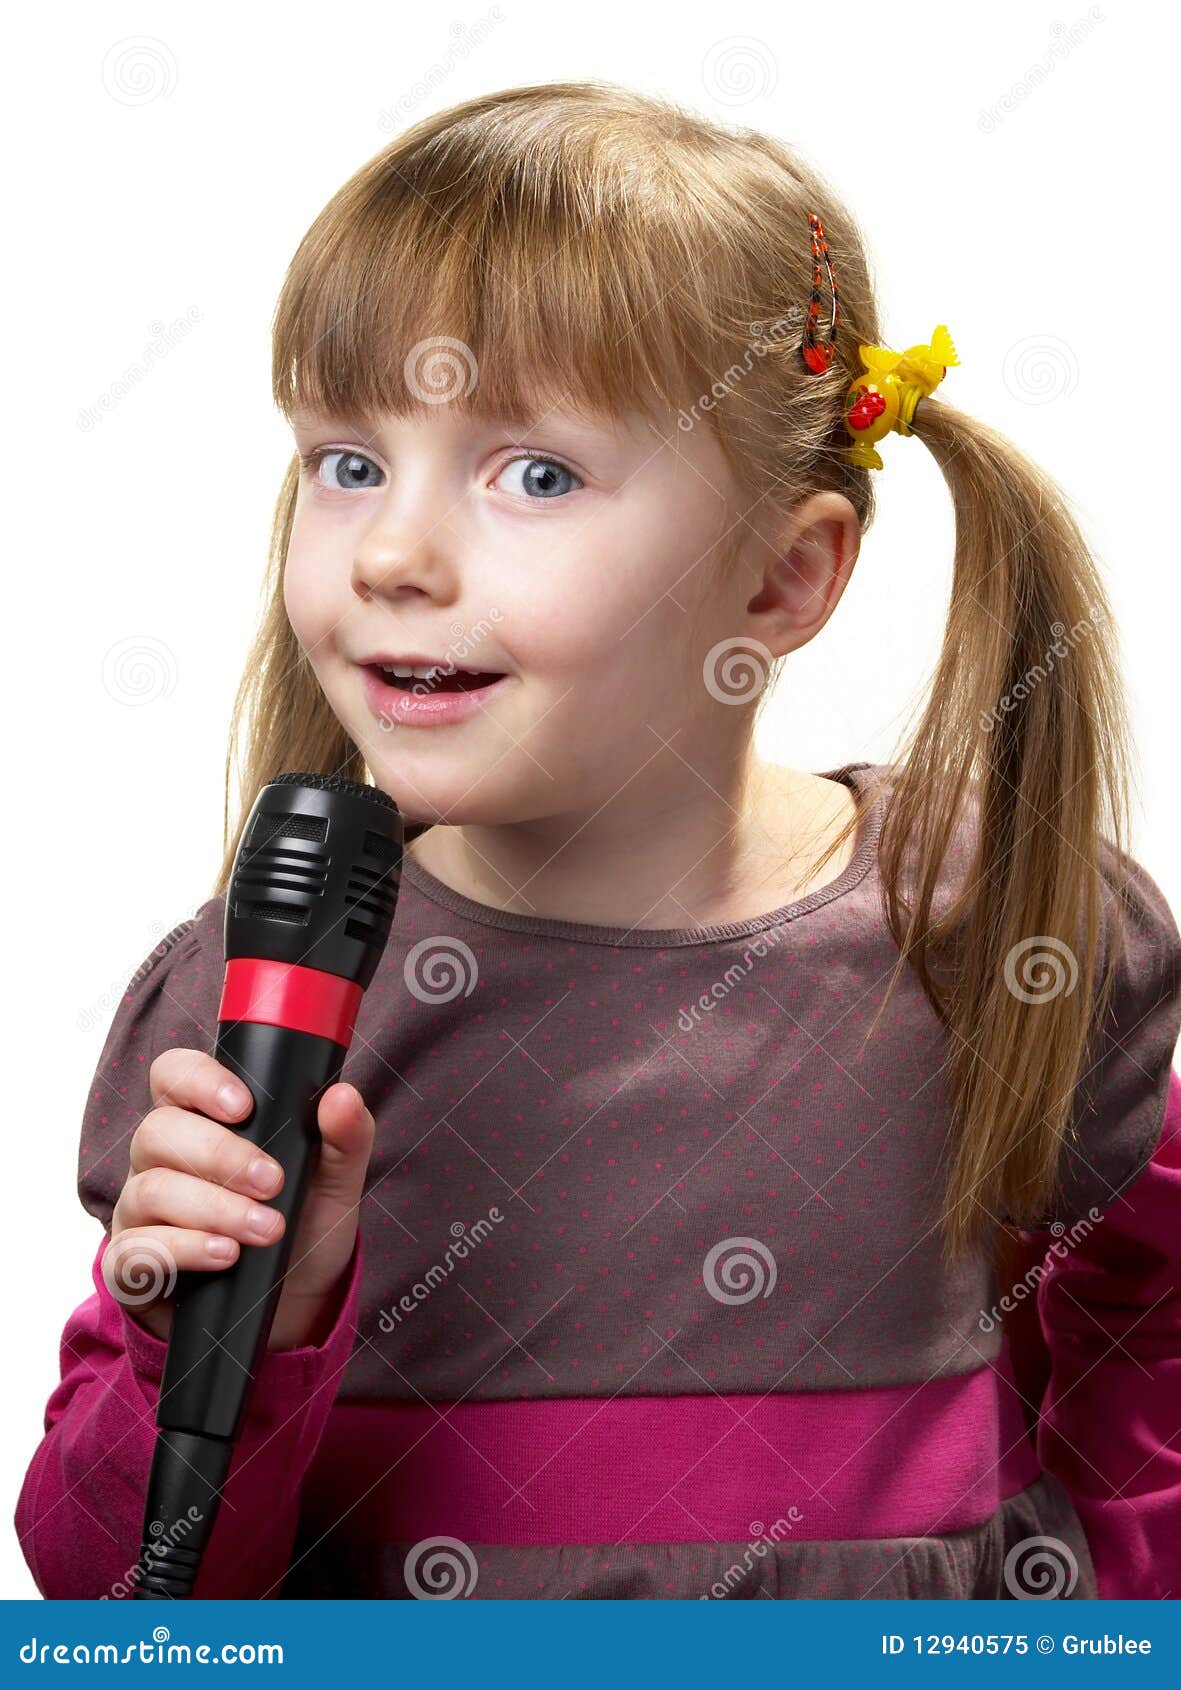 Little singer. Funny little girl singing with microphone isolated over white background